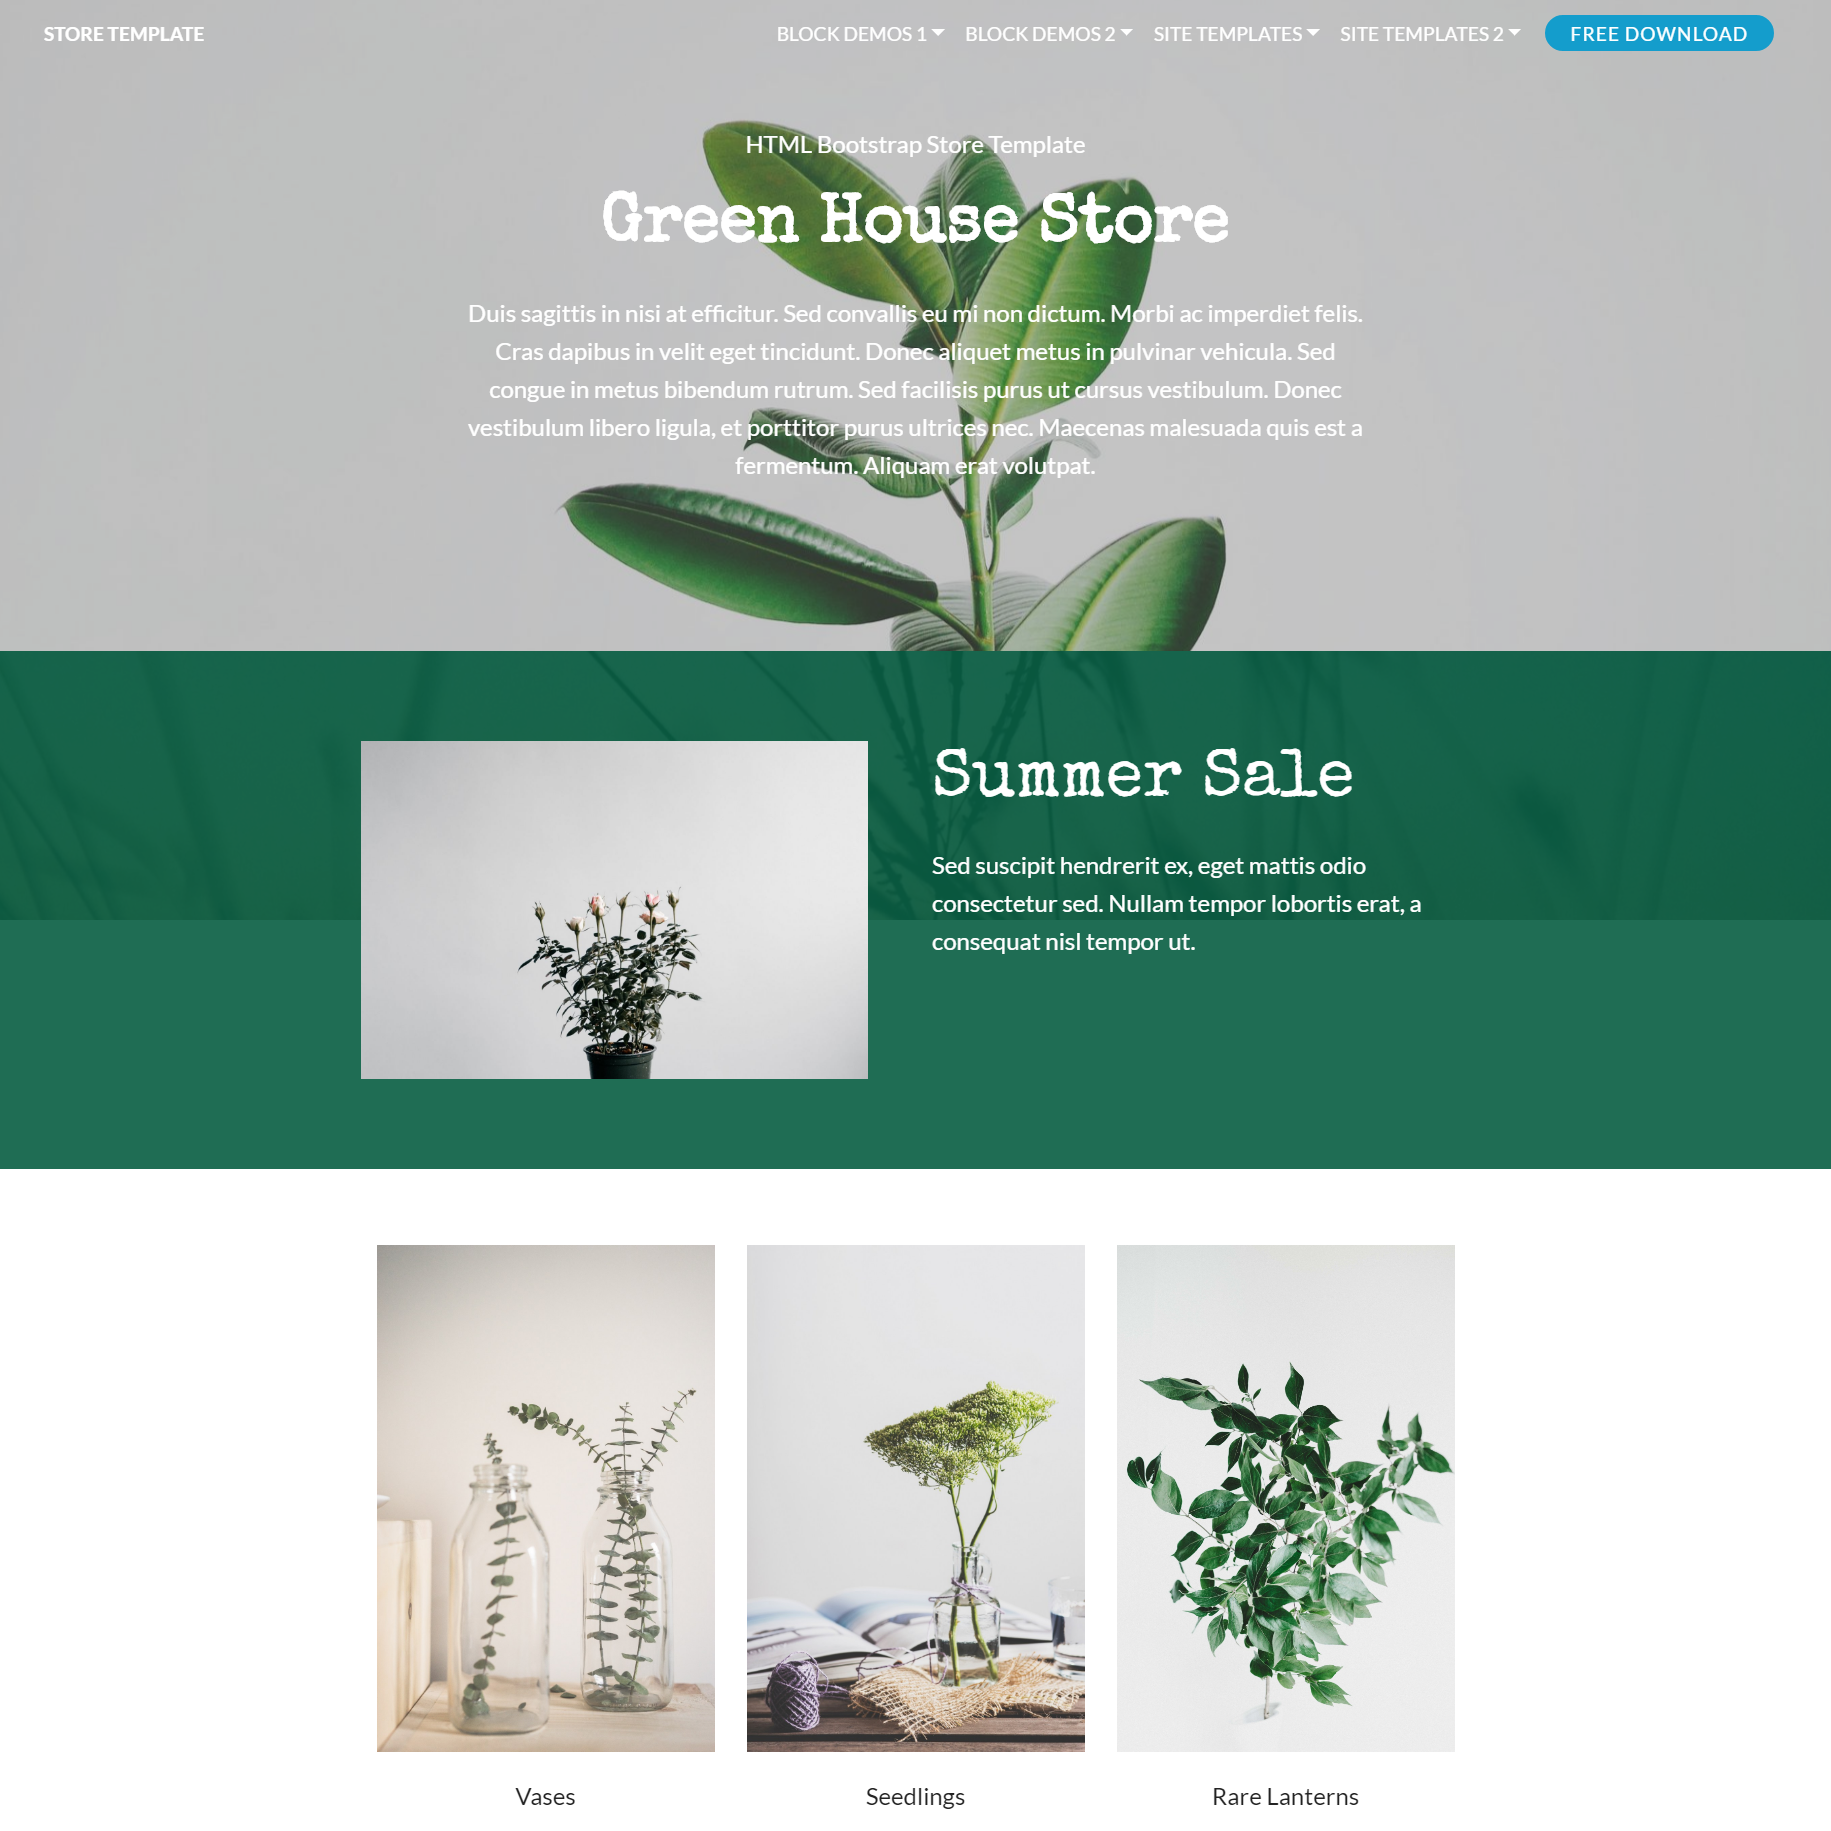 Free Download Bootstrap Store Themes